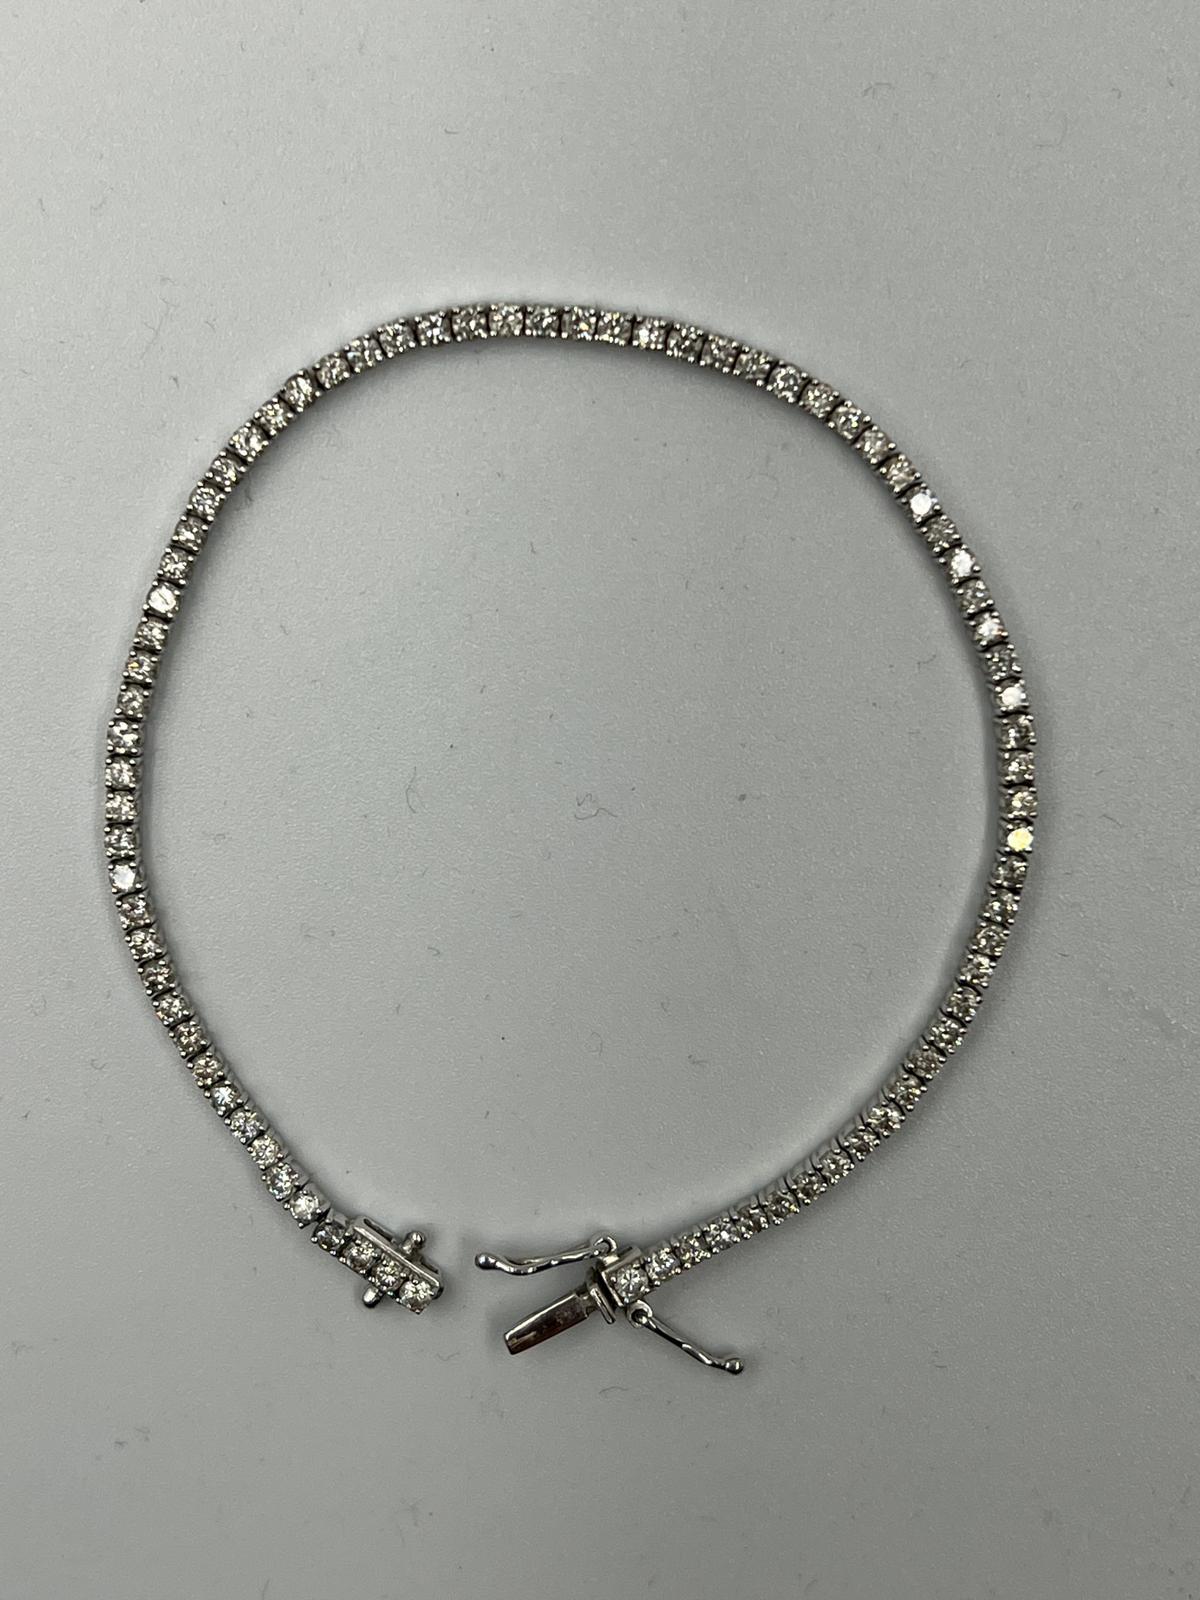 An 18ct white gold Tennis or line bracelet set with approximately 3ct of diamonds. - Image 11 of 25